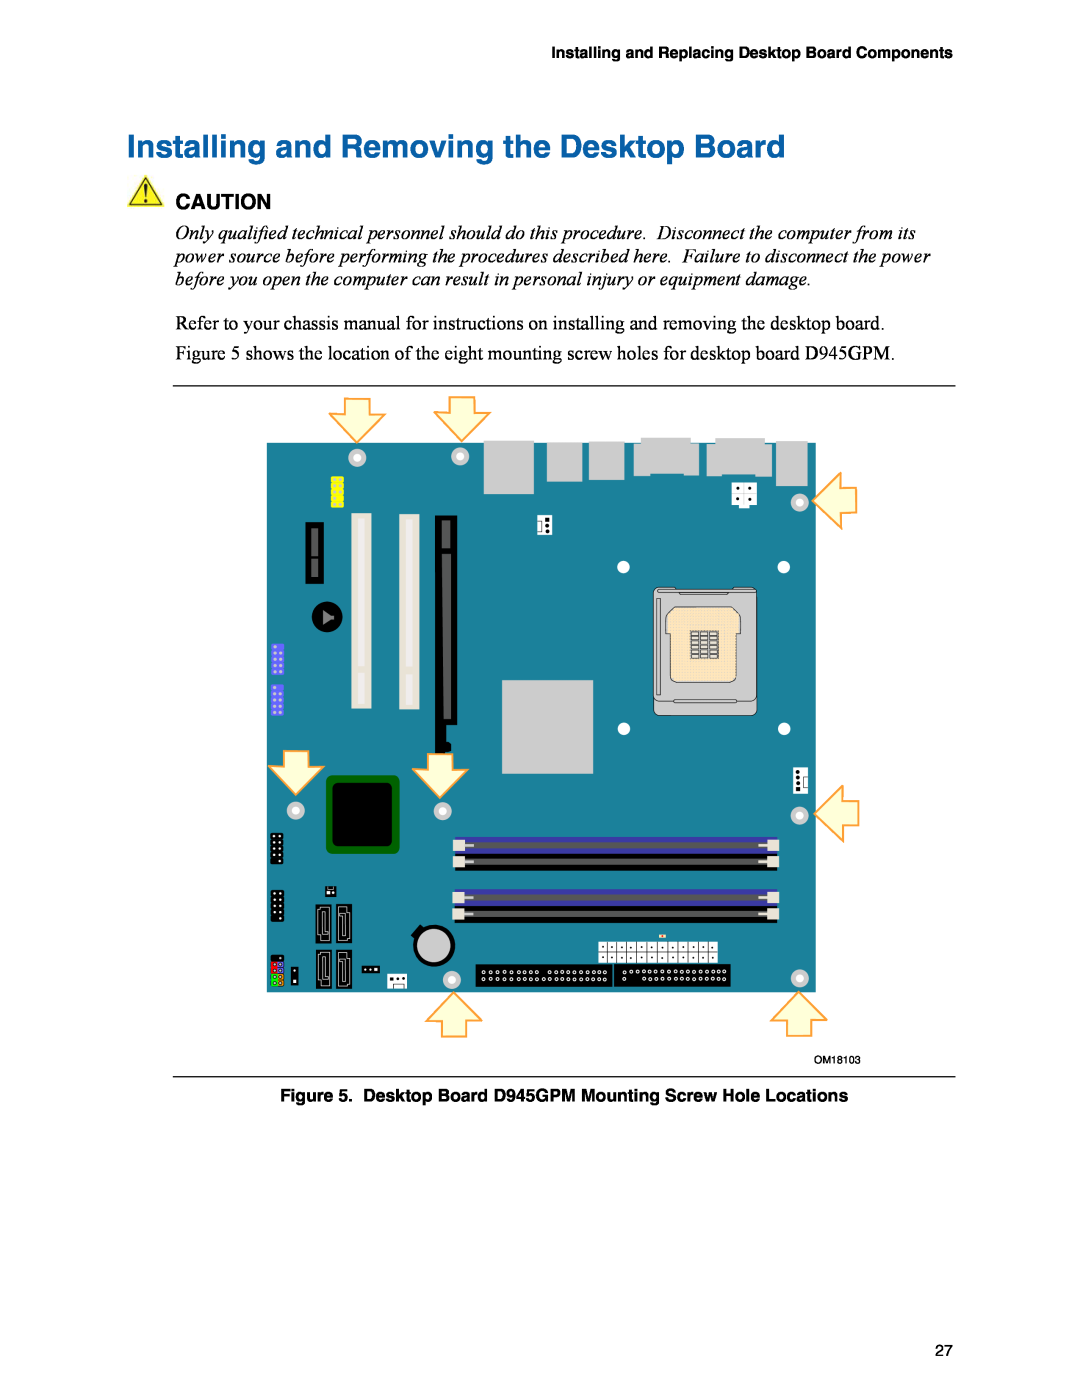 Intel manual Installing and Removing the Desktop Board, Desktop Board D945GPM Mounting Screw Hole Locations 